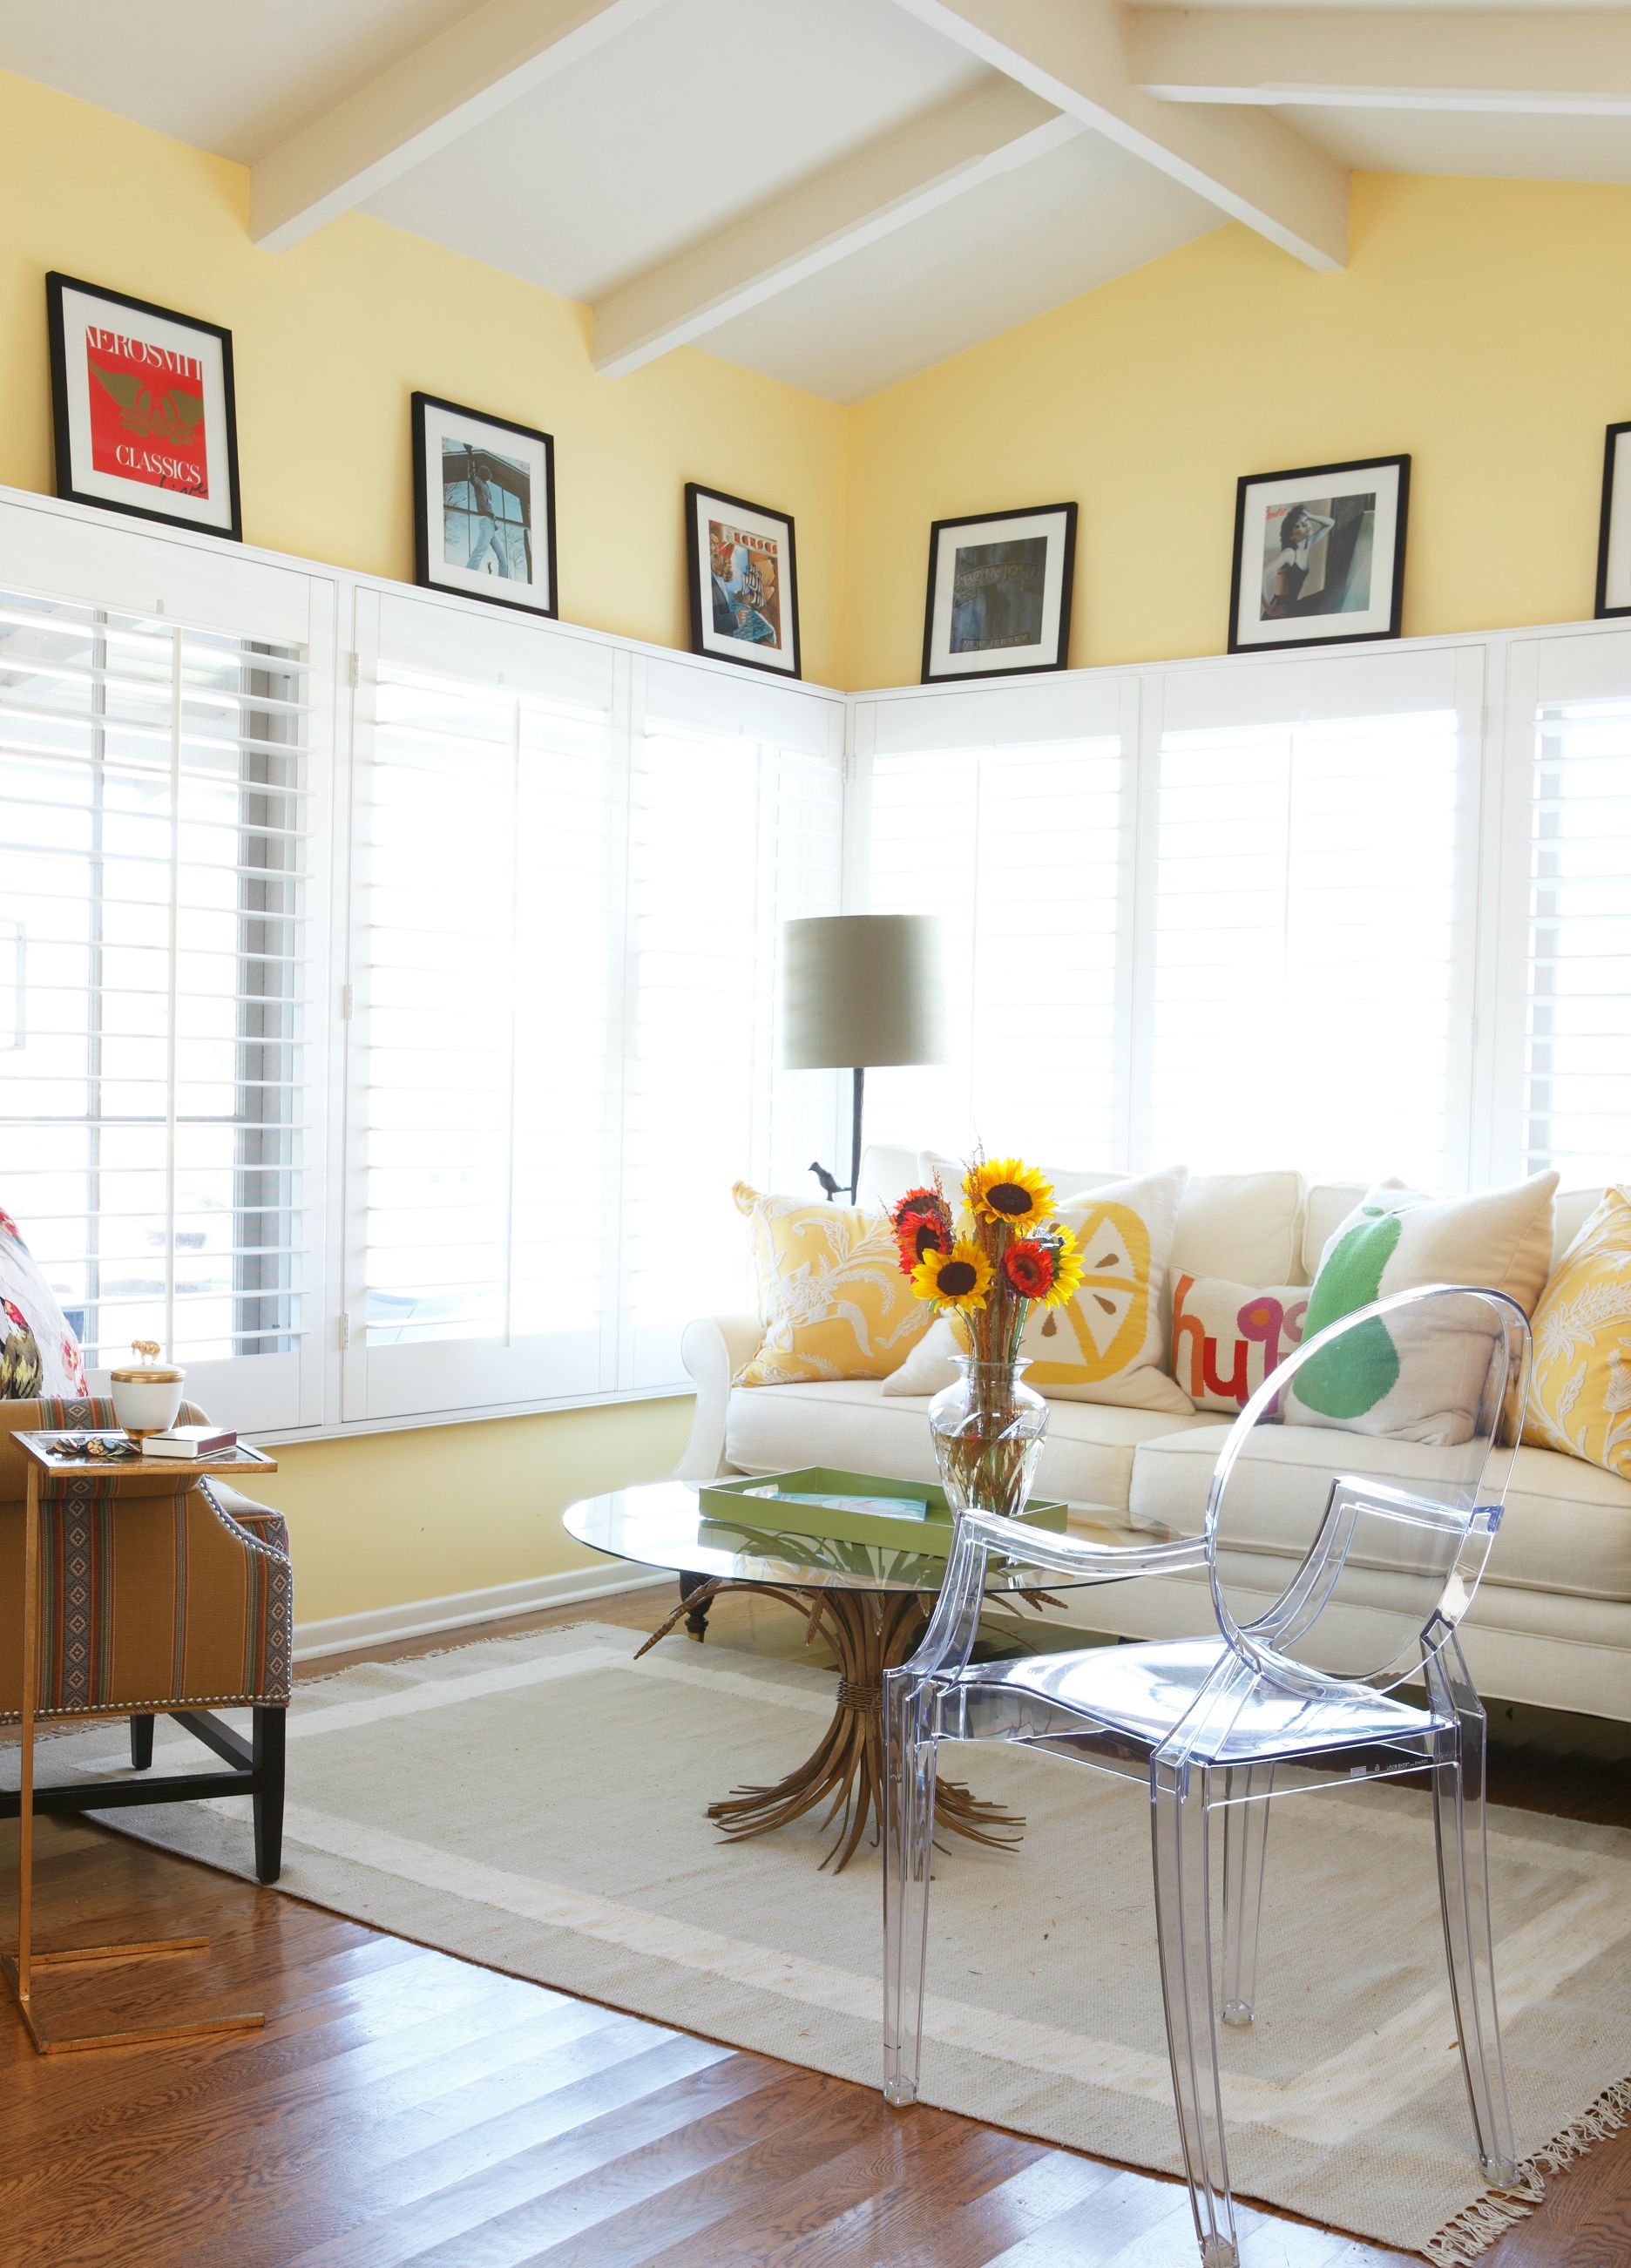 Brightly colored framed pictures add a pop of color along the top of the windowsills.